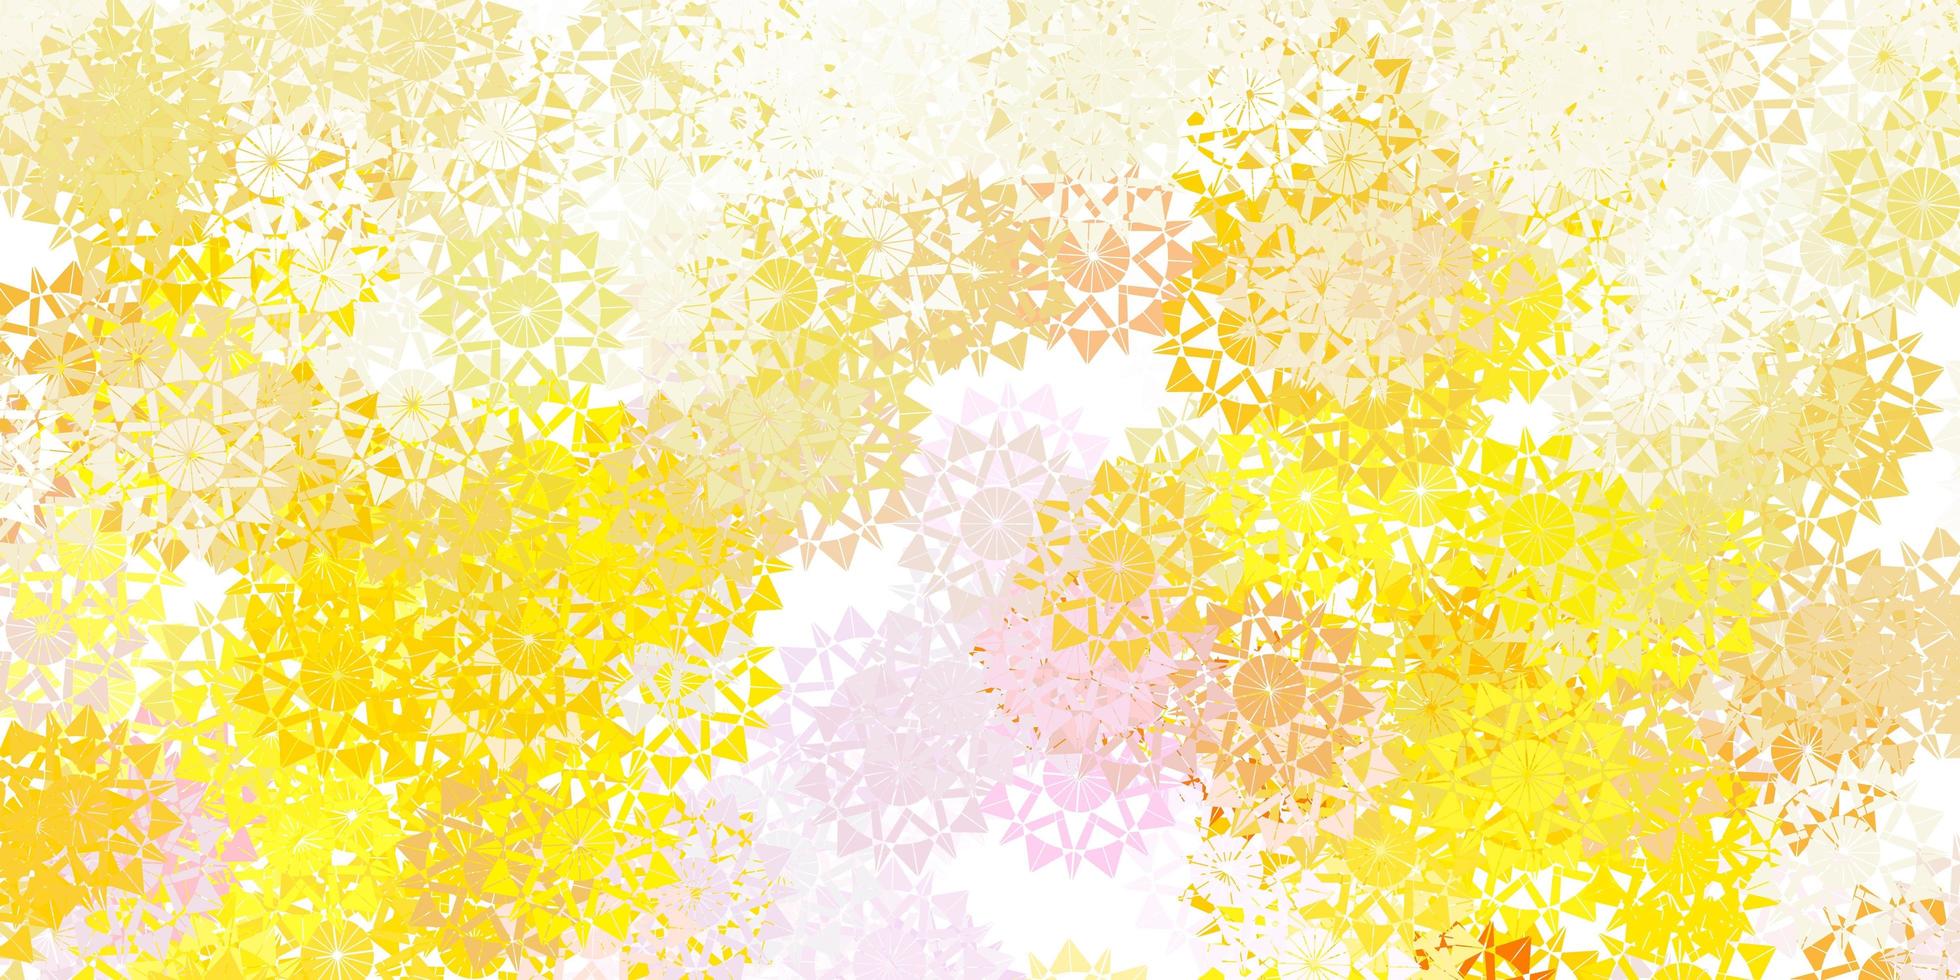 Light pink yellow vector pattern with colored snowflakes